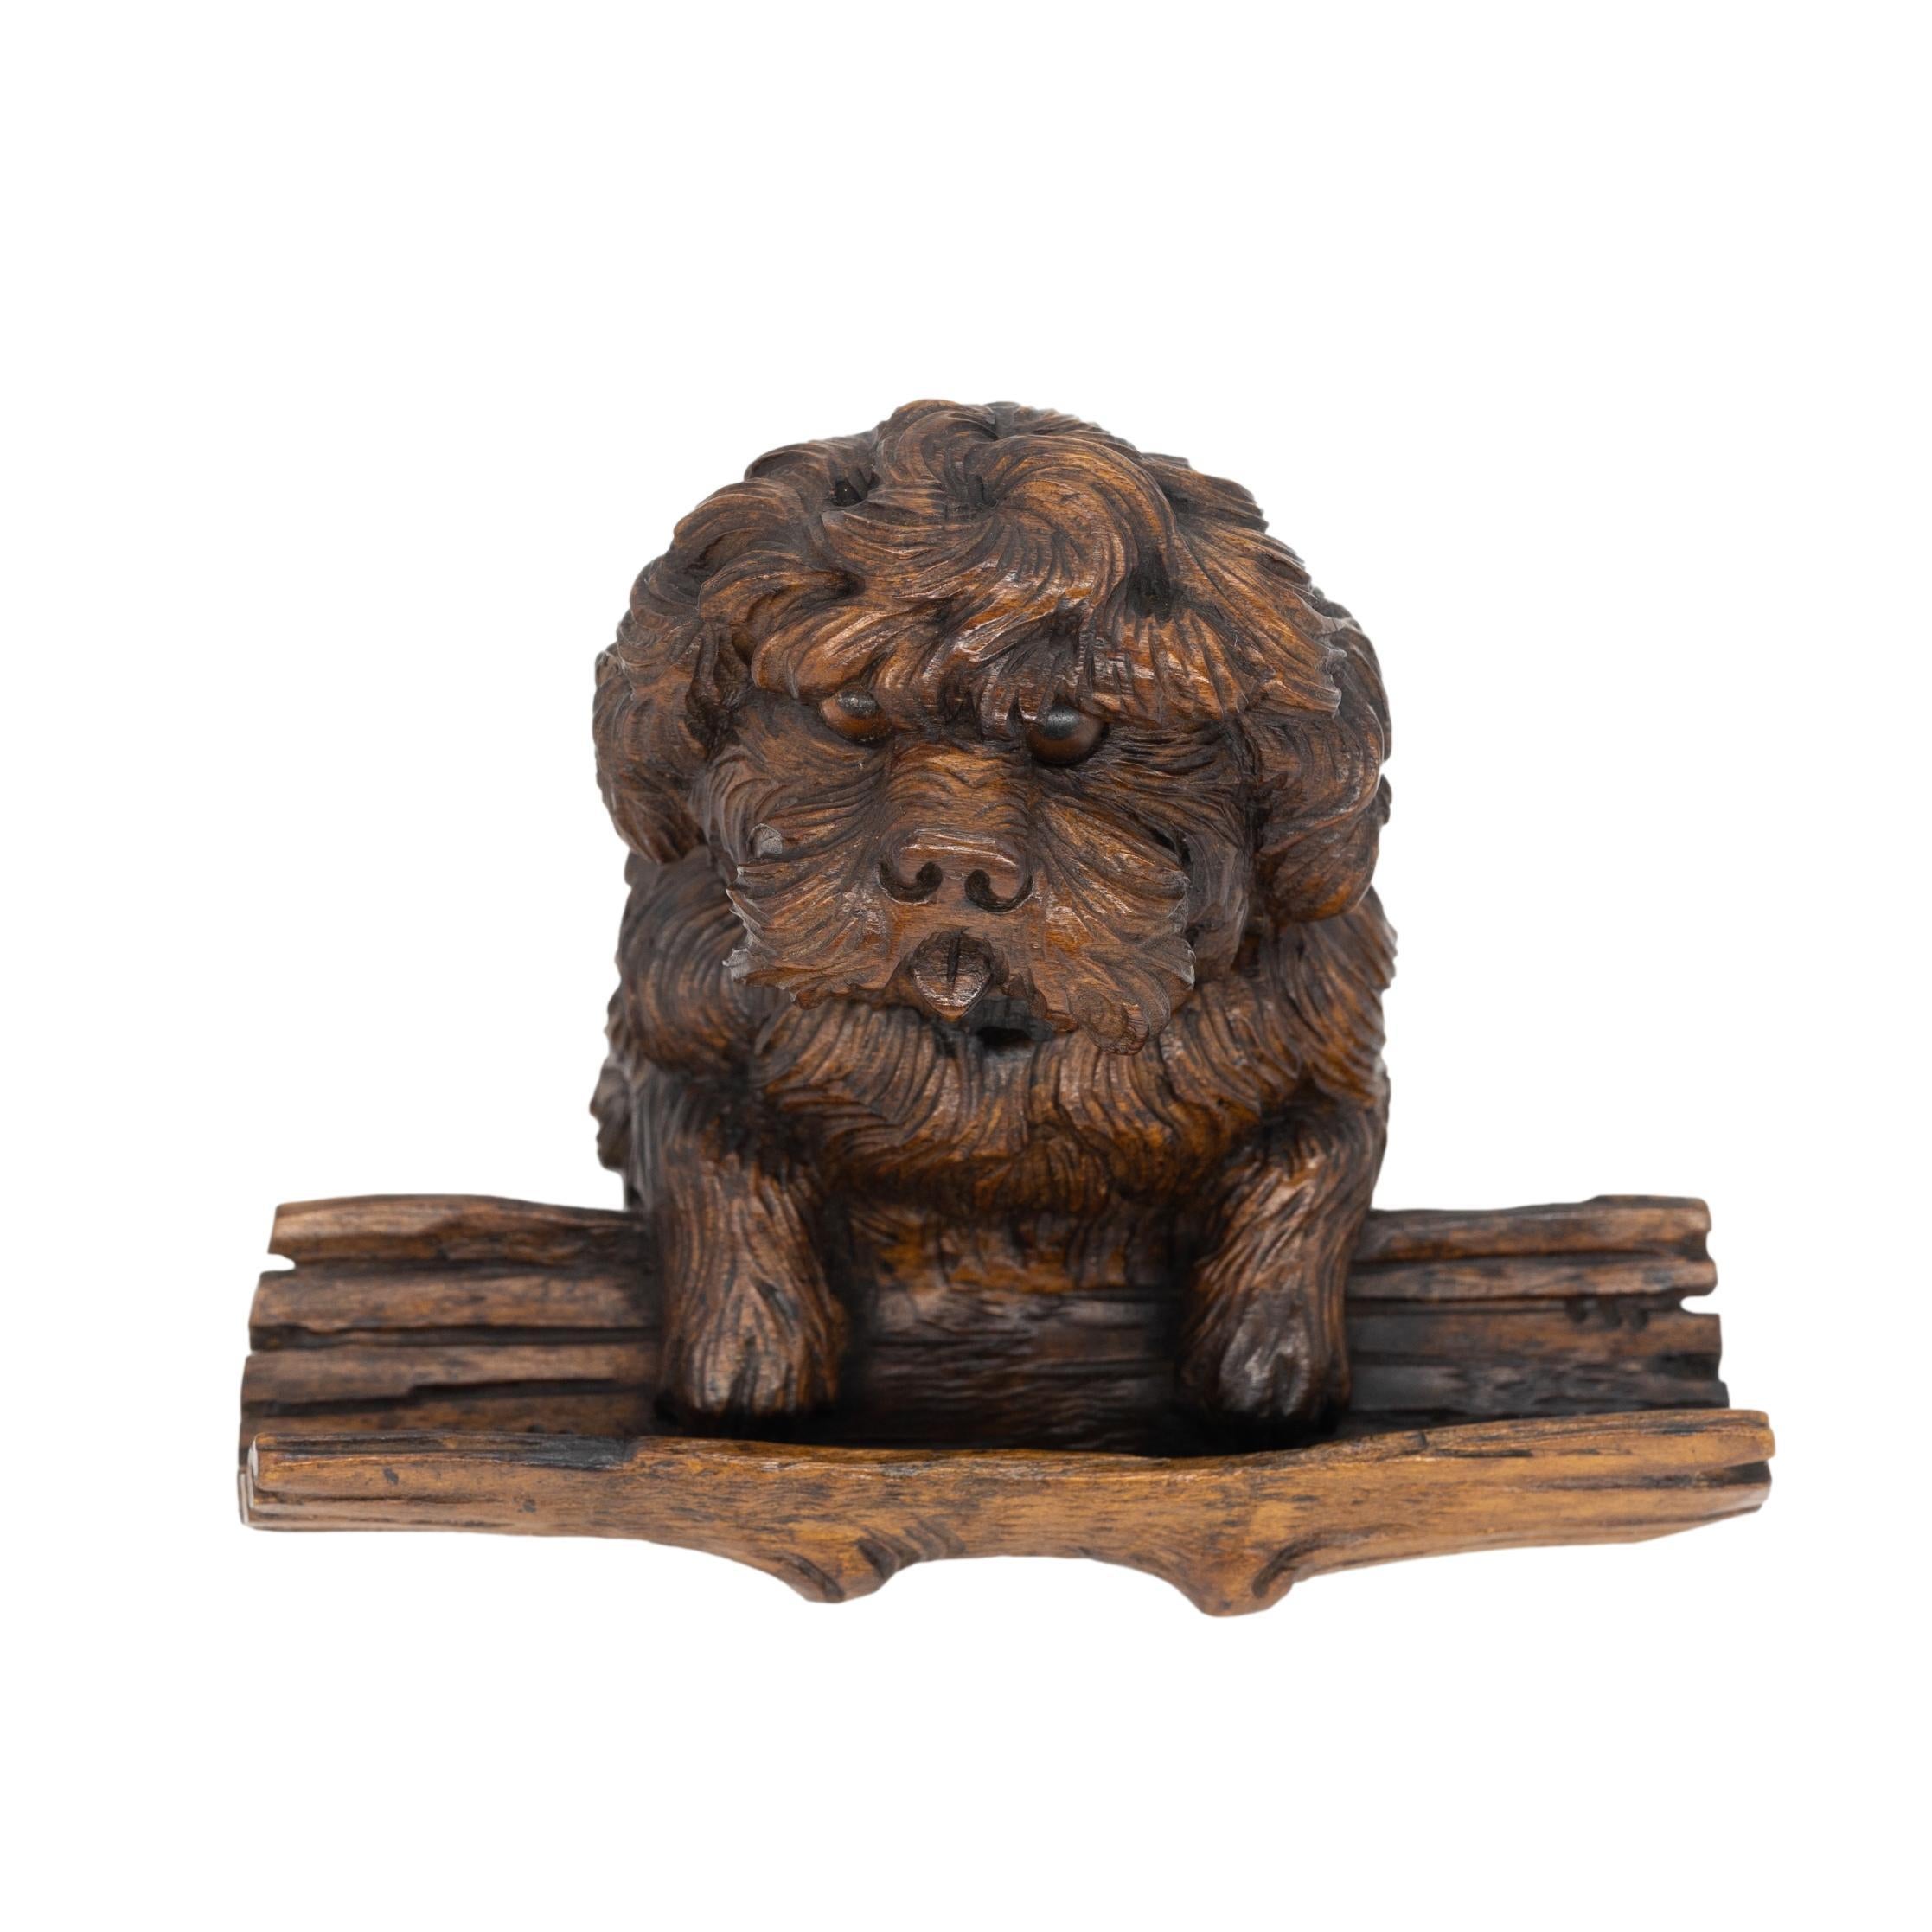 Black Forest Breinzware Inkwell, carved as begging terrier with tongue protruding, with inset glass eyes, the hinged head concealing a glass inkwell, the dogs front paws mounted on a naturalistically carved hollowed tree forming the pen tray,